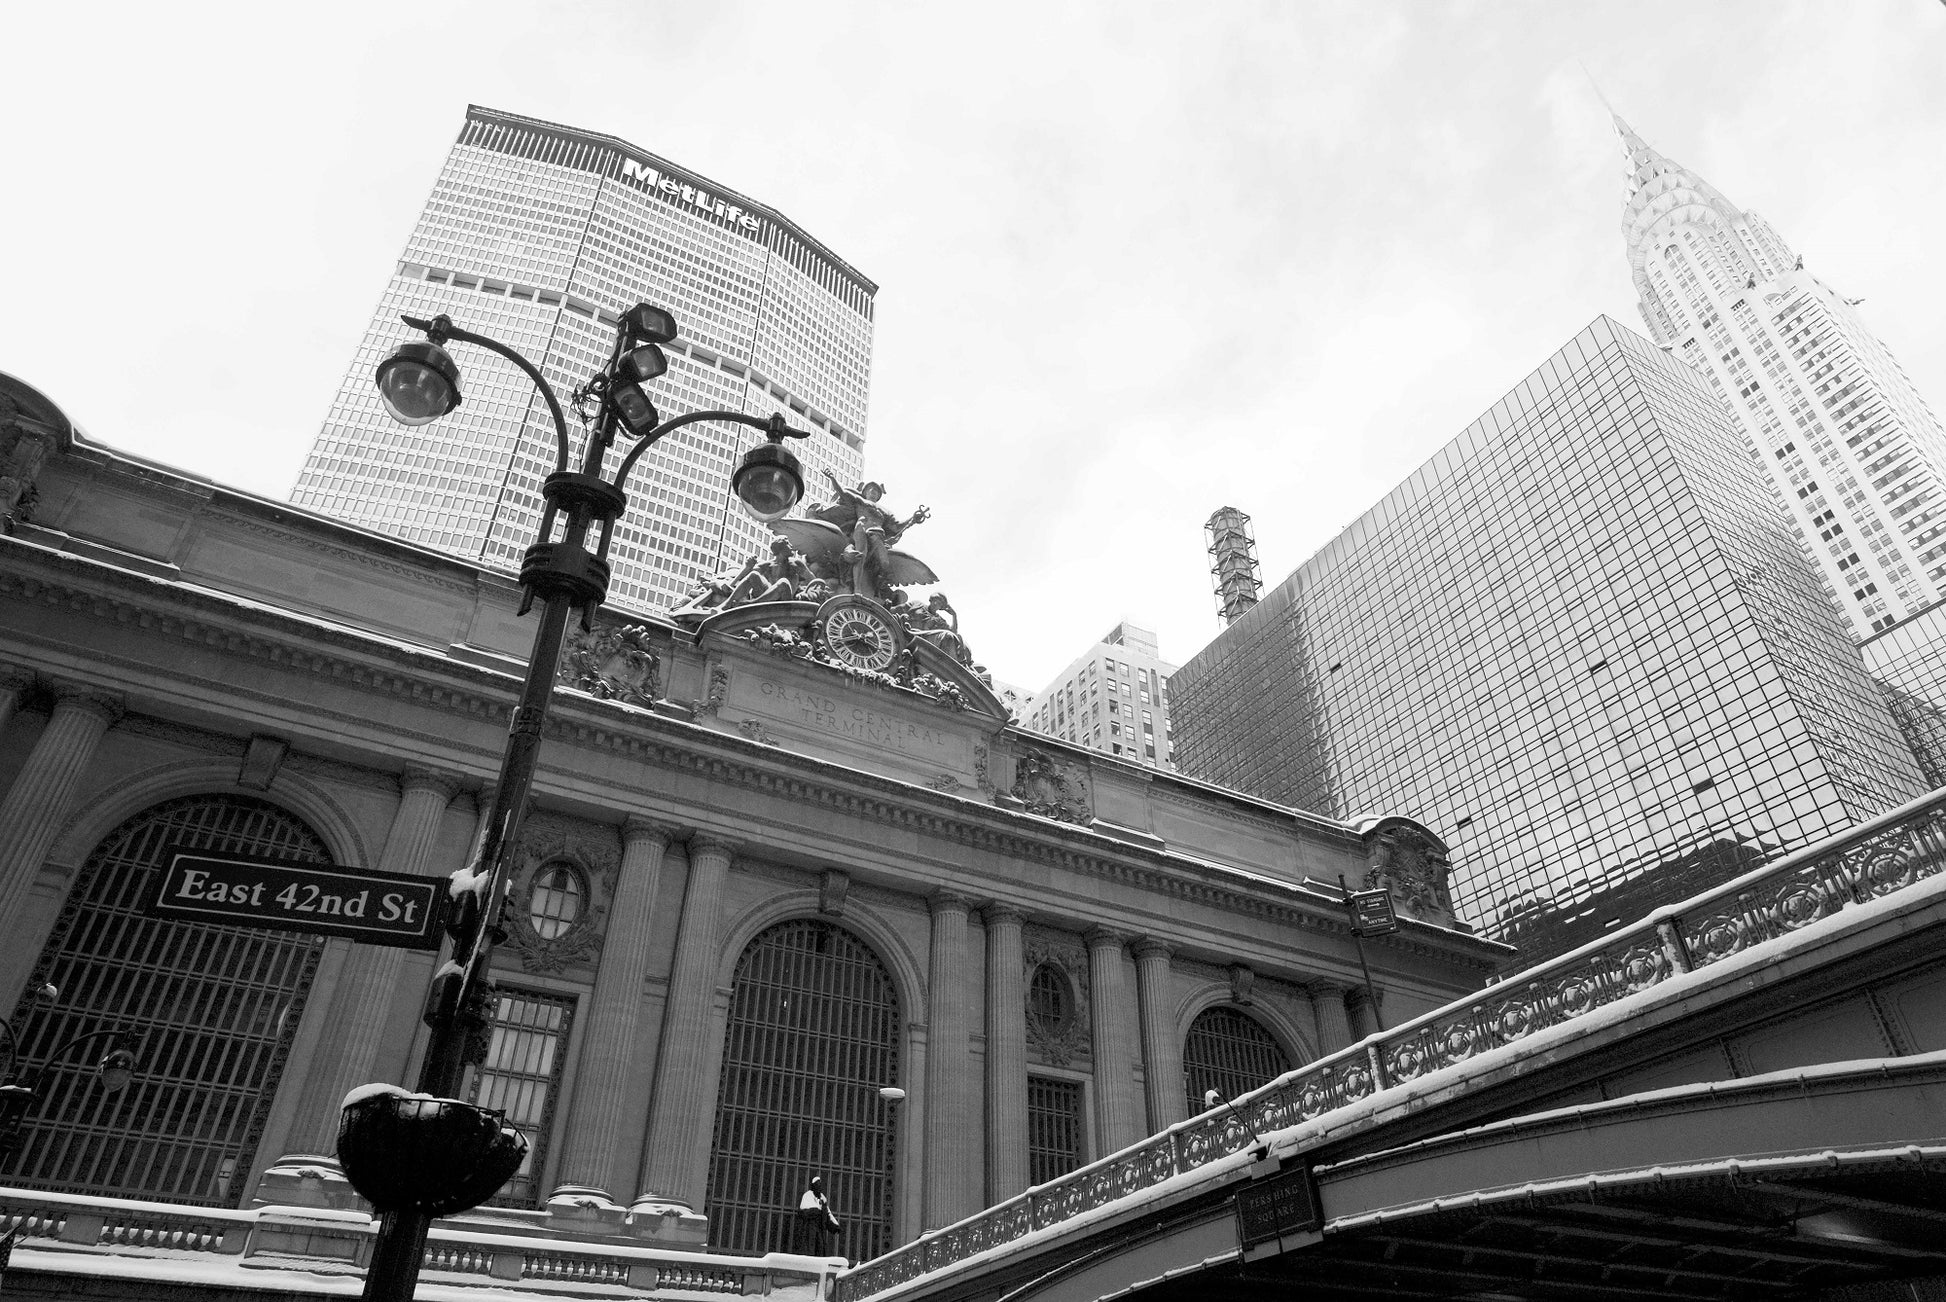 Alessandra Mattanza | EQUALITY OF SHAPES, Grand Central Station, New York. The MetLife Building looms over the figures of Mercury, Hercules and Minerva above the Tiffany glass clock at the 42nd Street entrance. Available as a photographic print on acrylic glass.